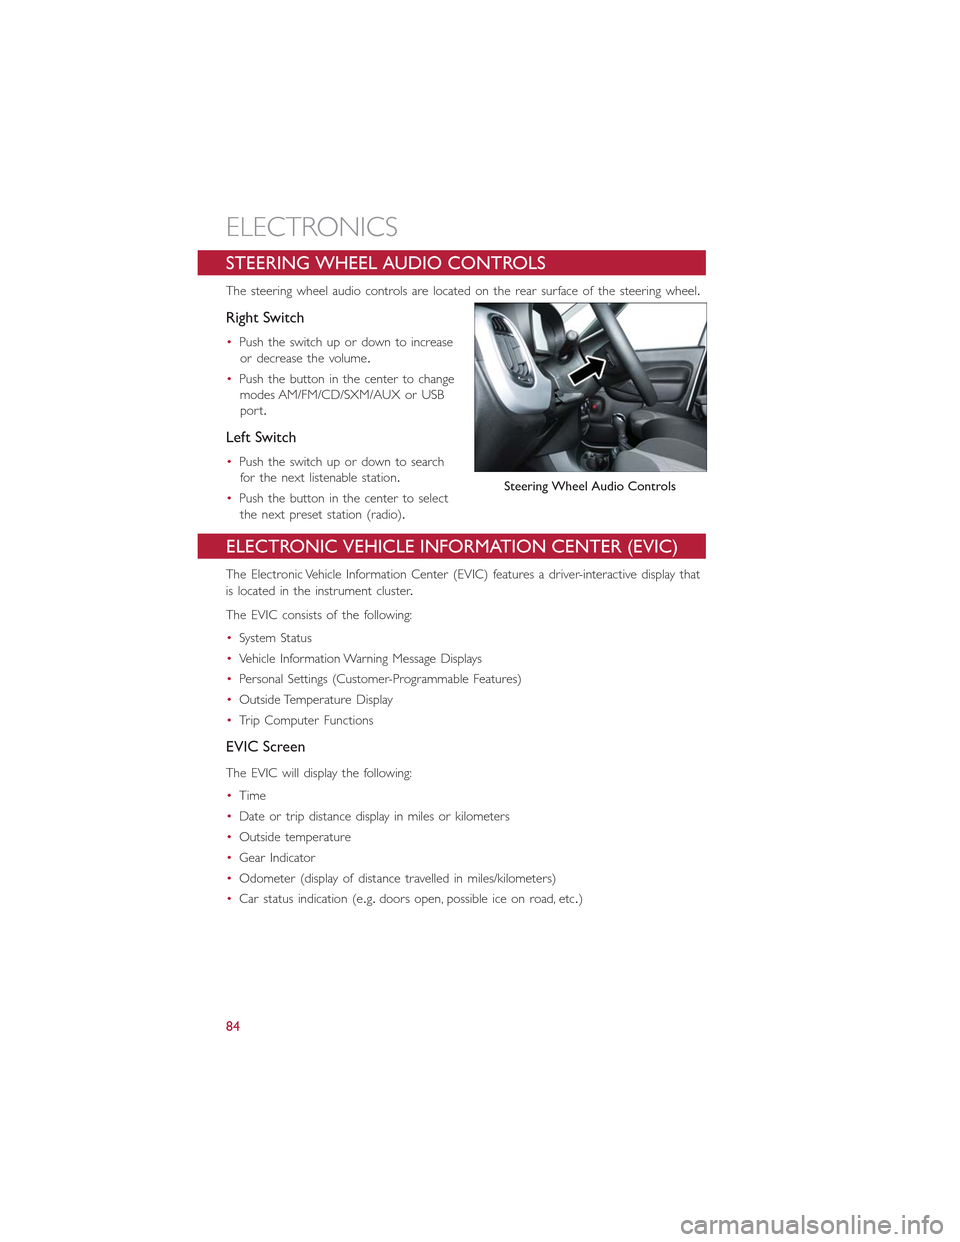 FIAT 500L 2015 2.G User Guide STEERING WHEEL AUDIO CONTROLS
The steering wheel audio controls are located on the rear surface of the steering wheel.
Right Switch
•Push the switch up or down to increase
or decrease the volume.
�